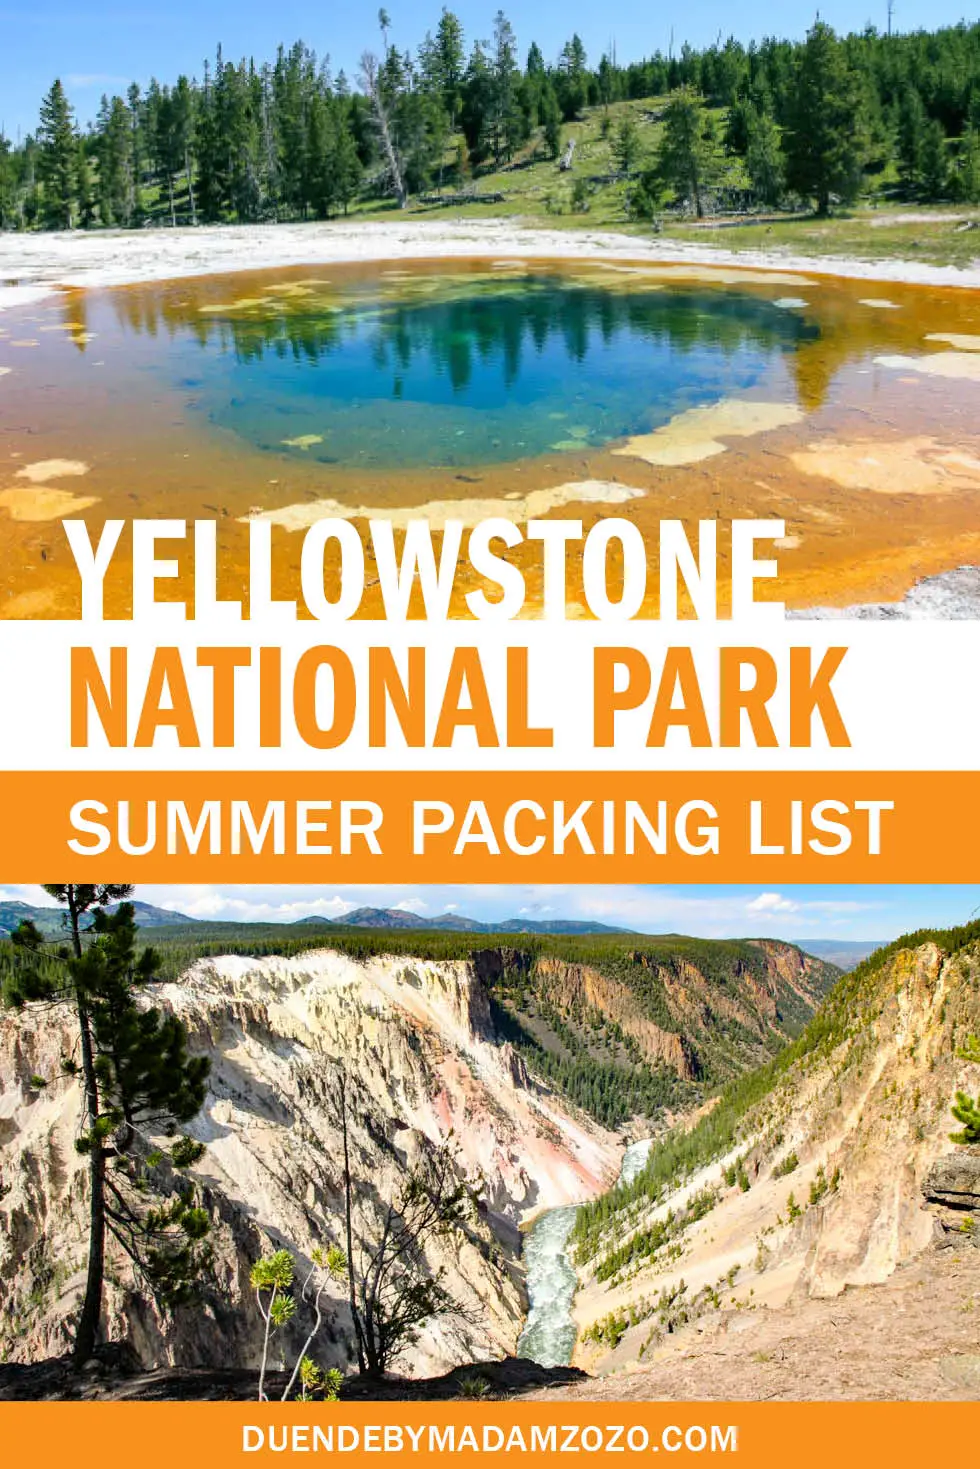 Images of Yellowstone National Park landscapes wiht text overlay reading "Yellowstone National Park Summer Packing List"